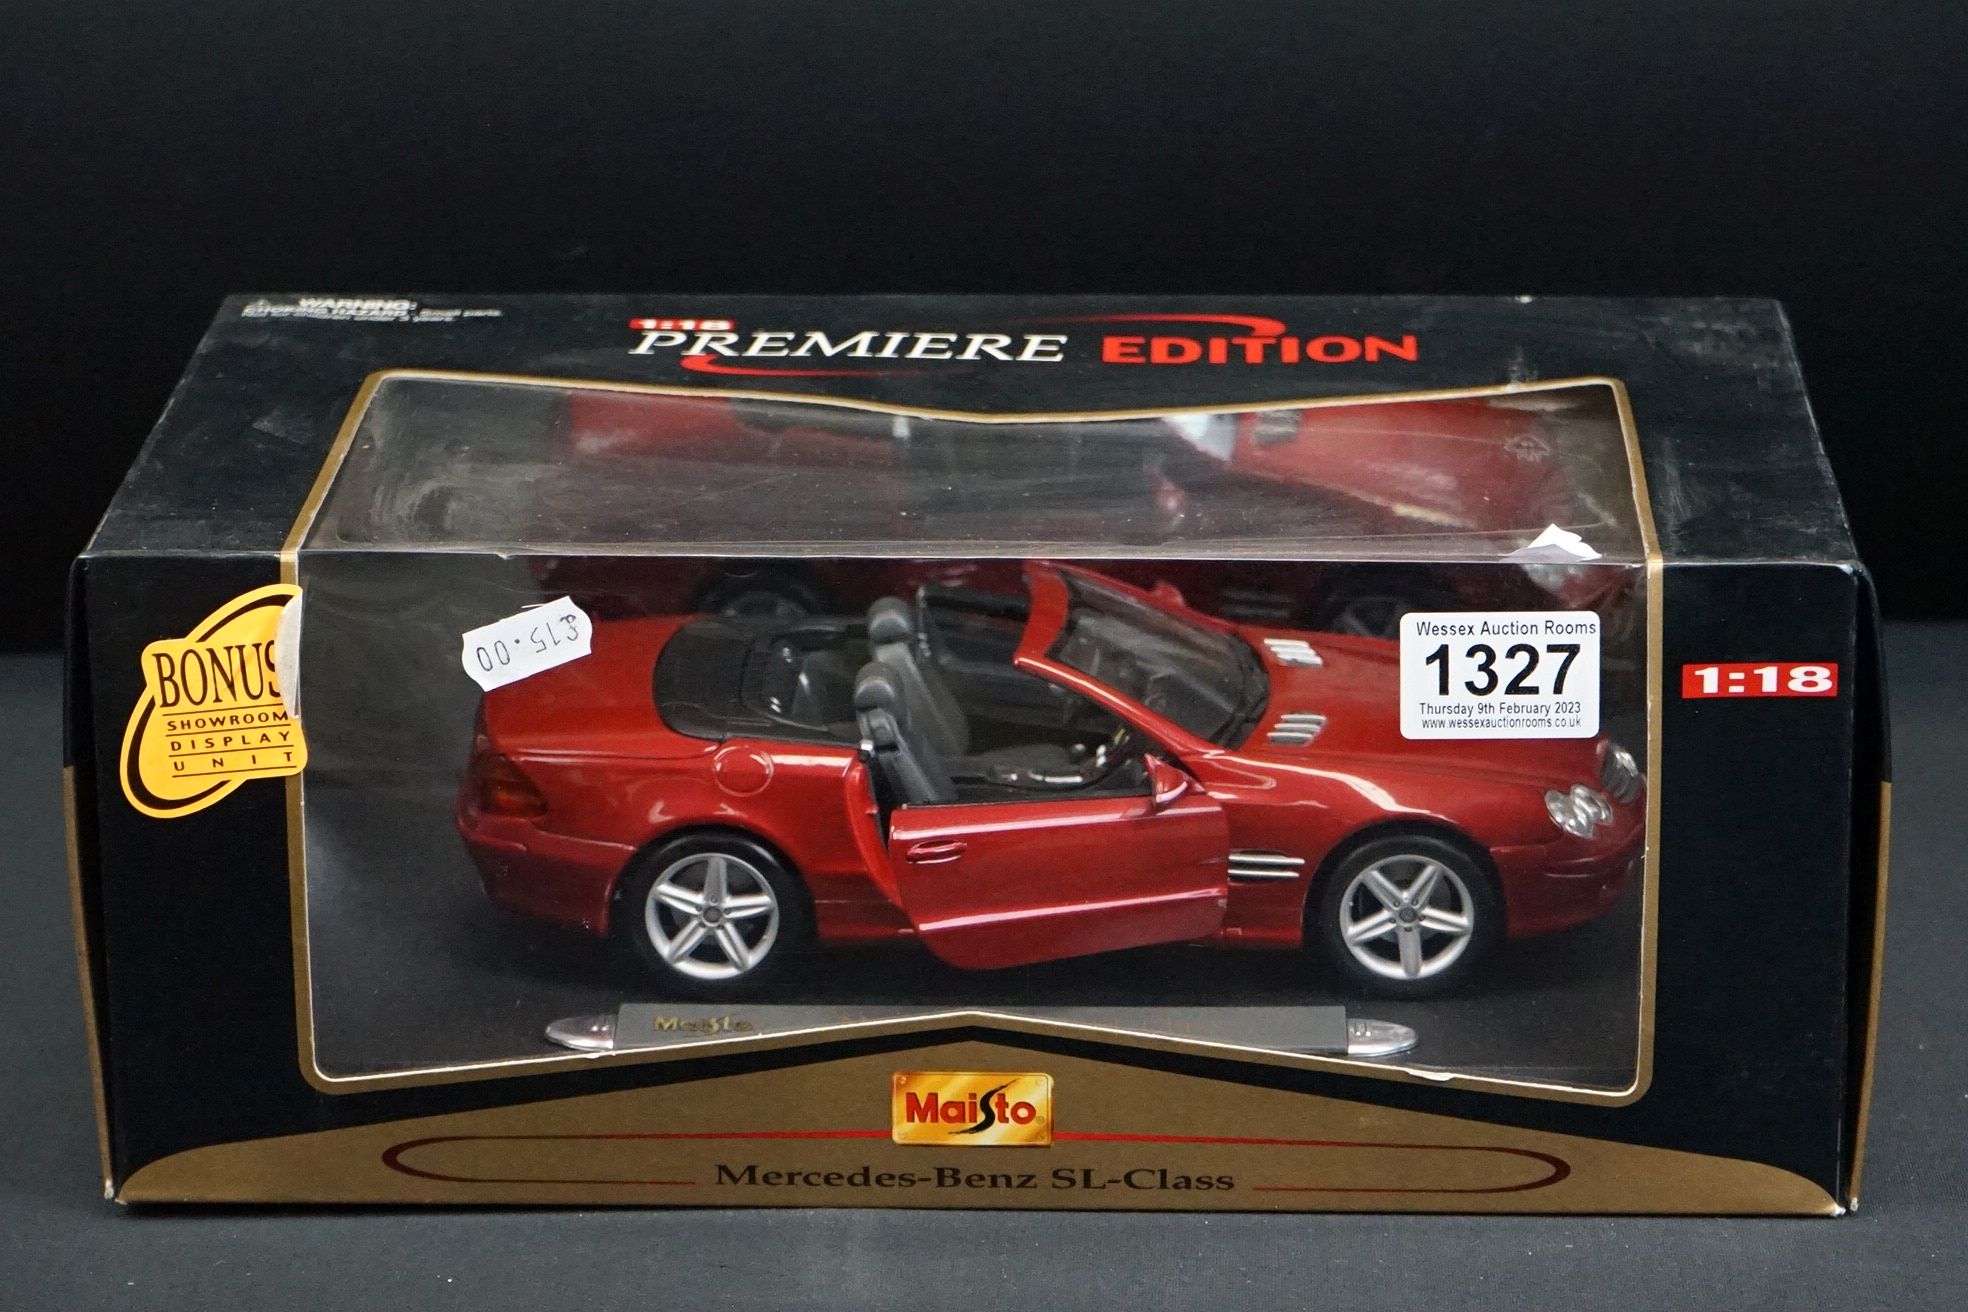 Four boxed Maisto 1/18 diecast models to include 3 x Premiere Edition (2 x Mercedes Benz SL Class, - Image 18 of 18